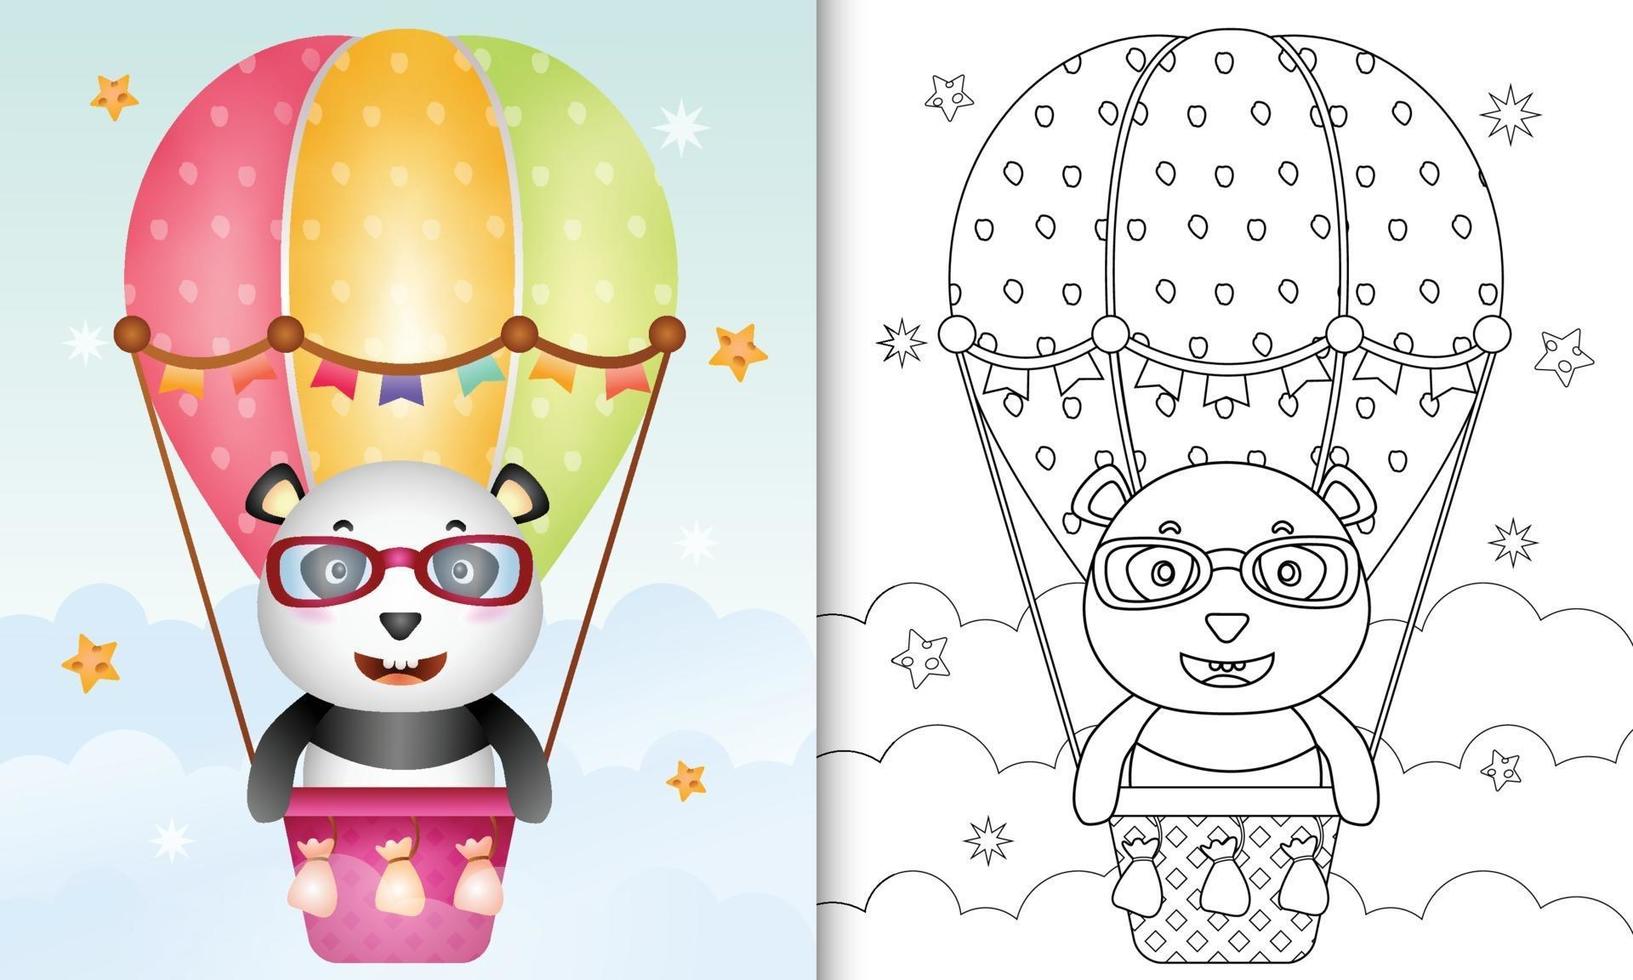 Coloring book for kids with a cute panda on hot air balloon vector